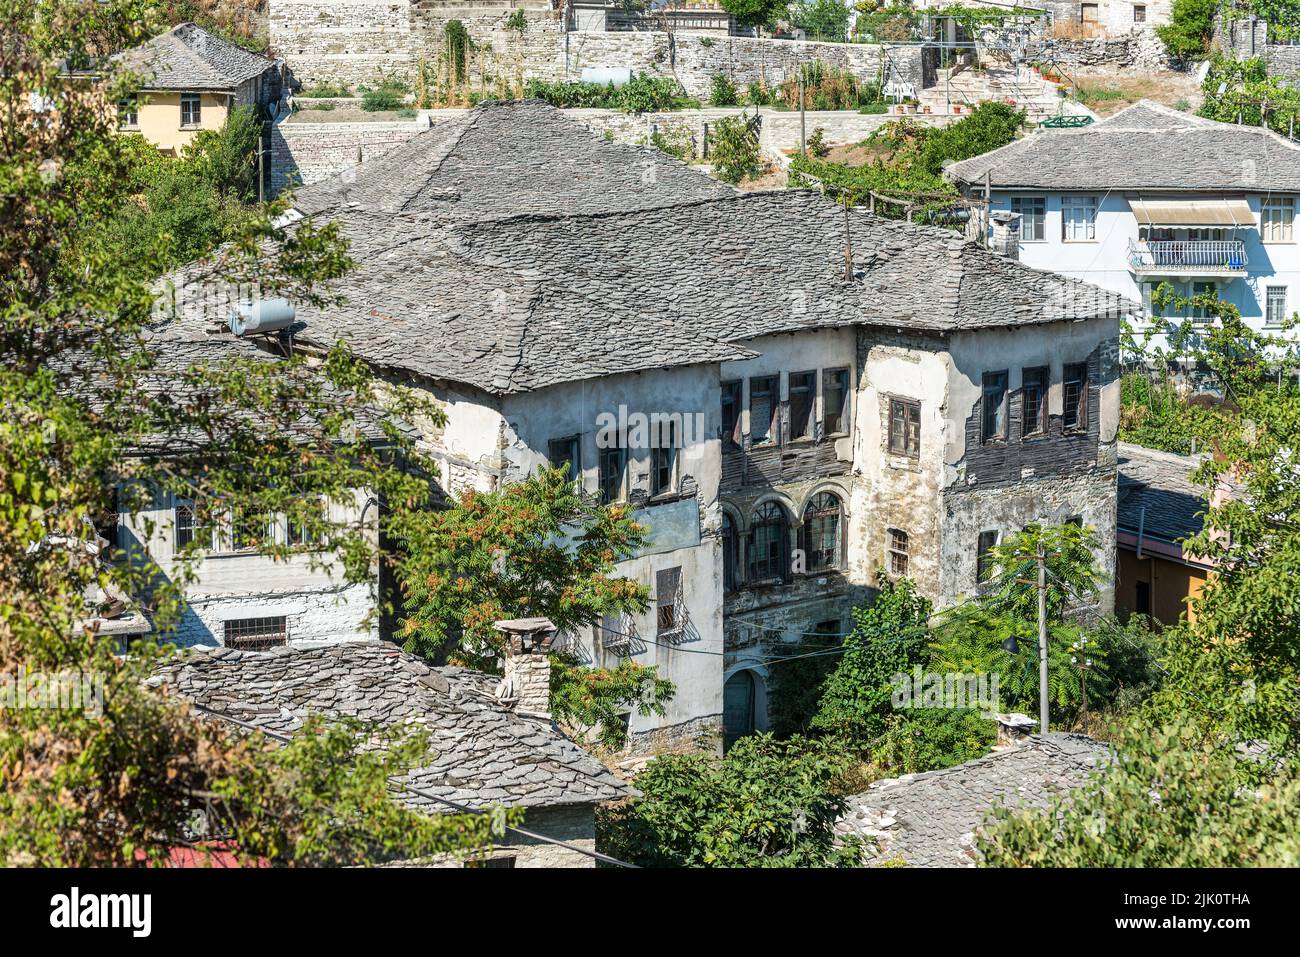 Gjirokaster, Albania - September 10, 2022: Roof made of stone tiles of the Ottoman old house on a mountain hill in Gjirokaster, Albania. Stock Photo